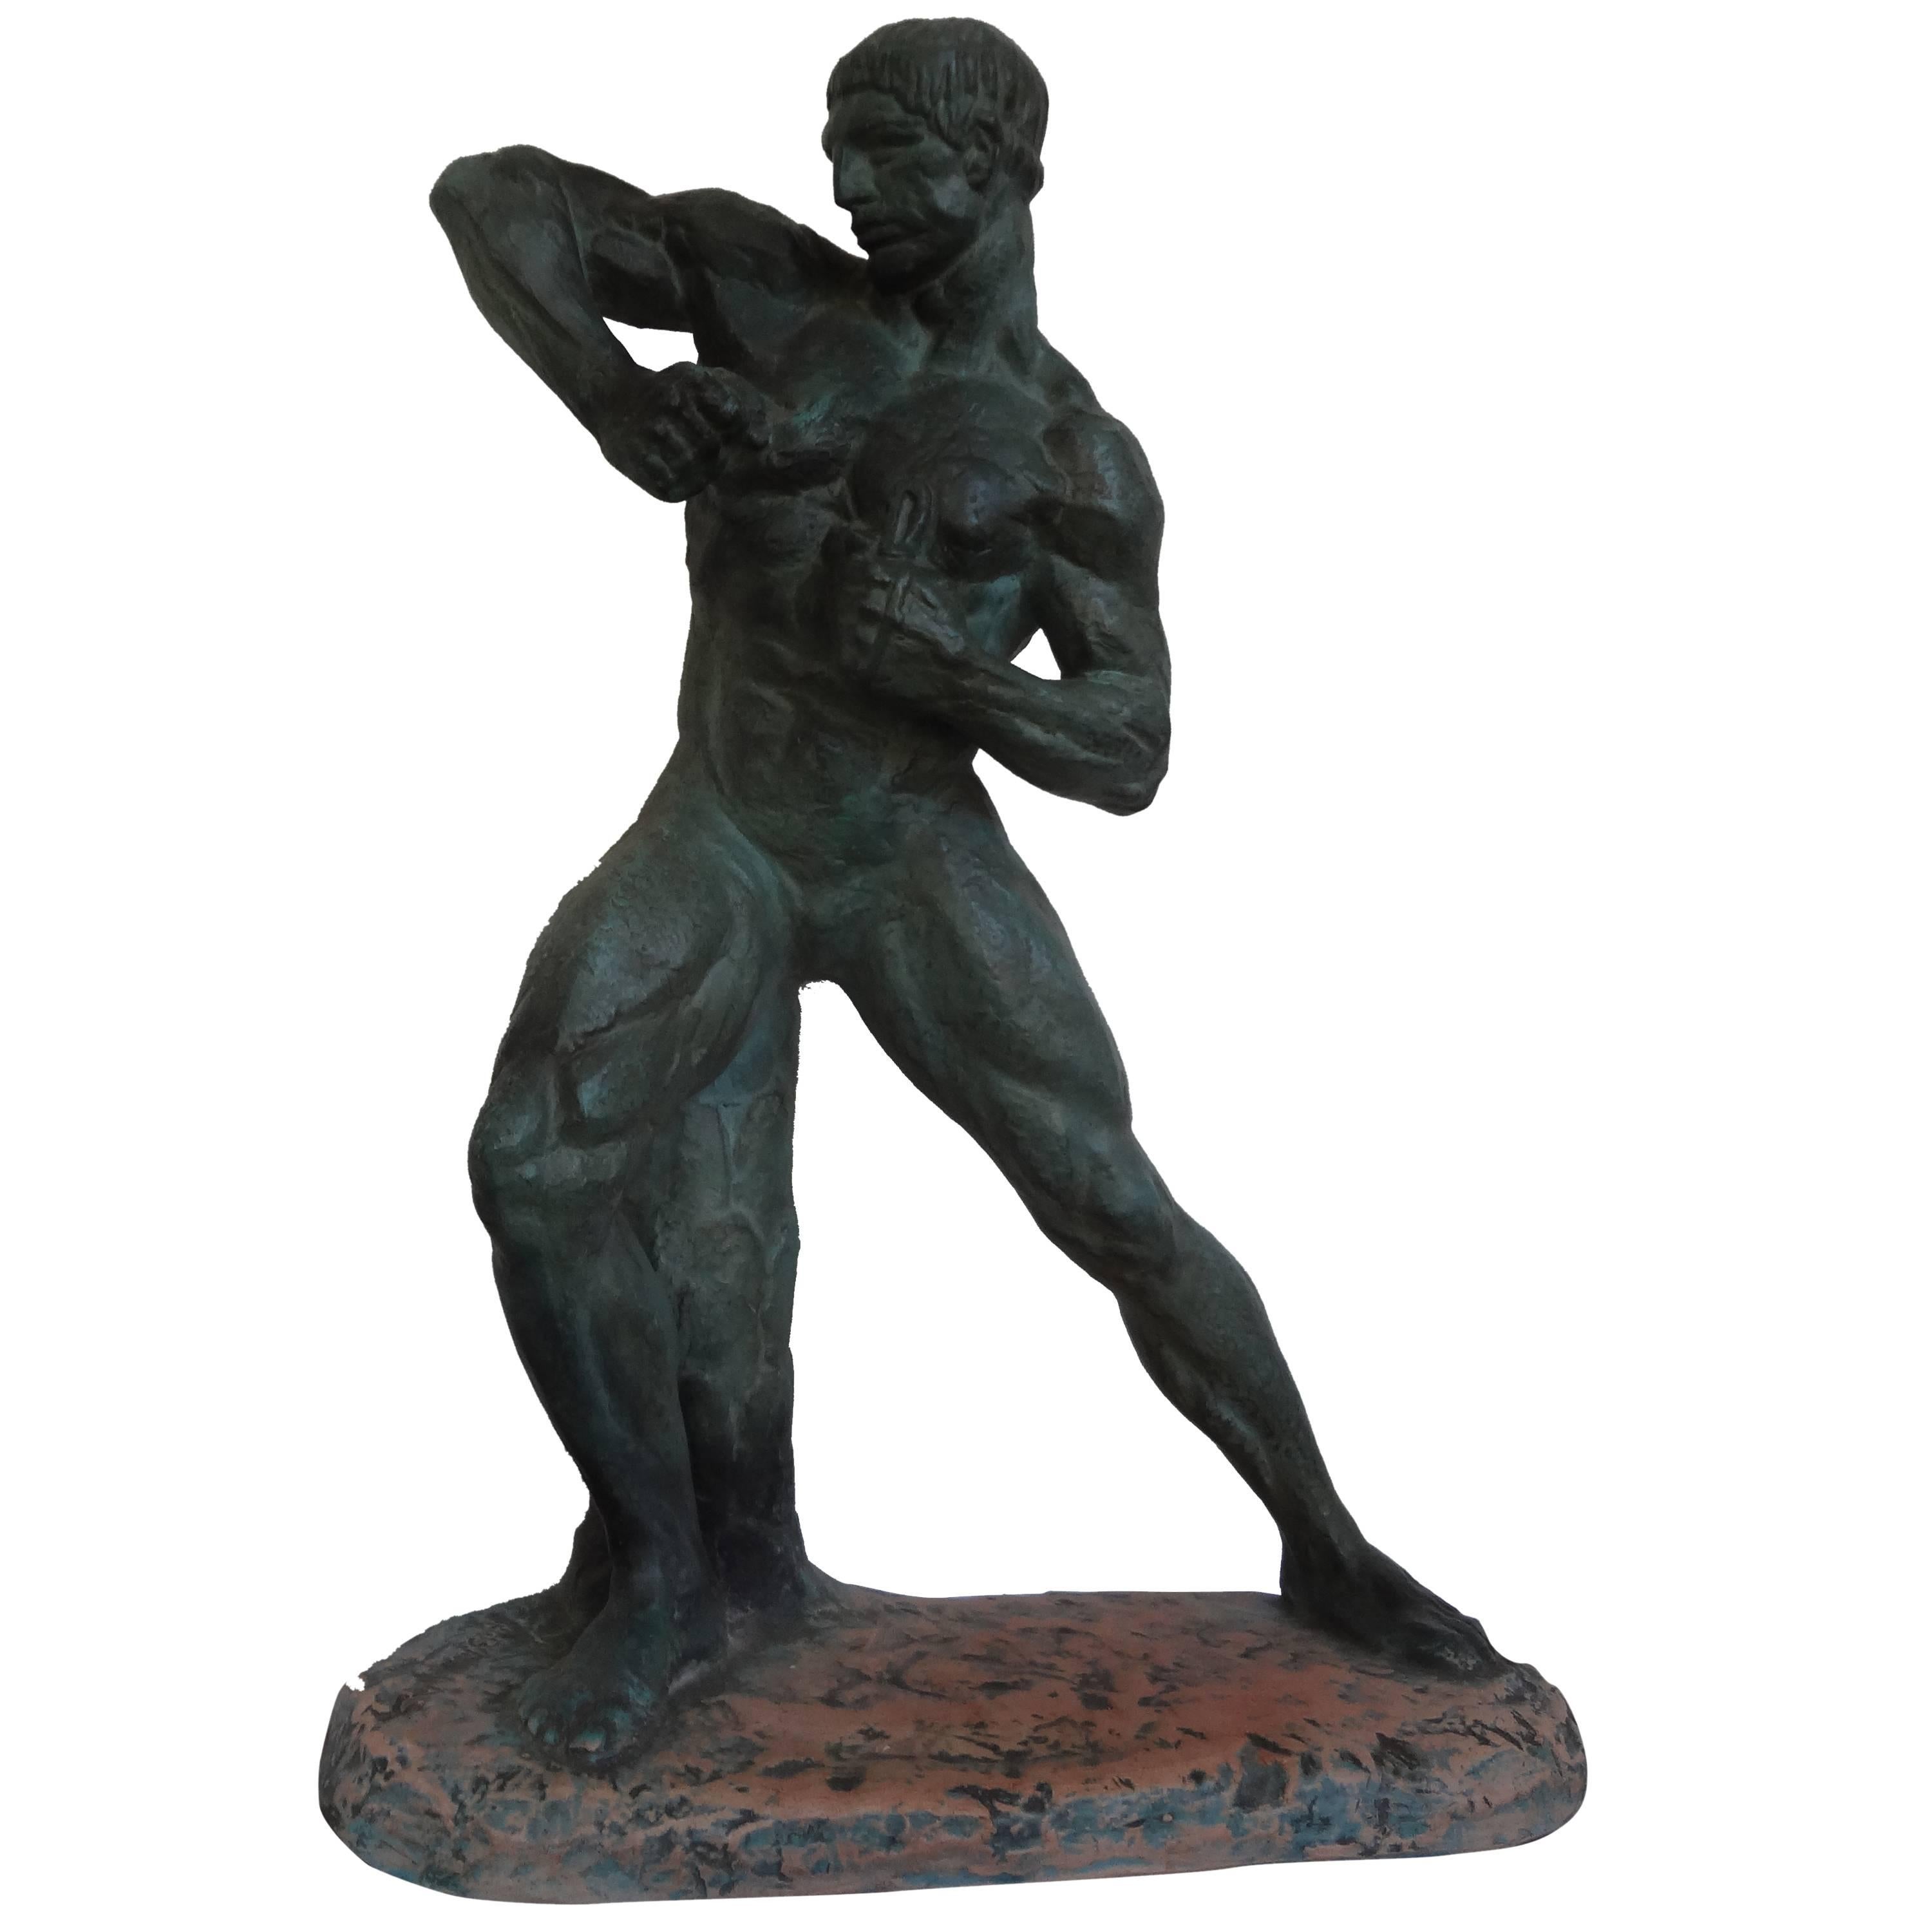 This fabulous French Art Deco patinated terracotta sculpture of a nude male athlete is signed Henri Bargas. This well executed sculpture has a patinated finish that resembles bronze and dates to the 1930s. 

Bargas exhibited at the Paris